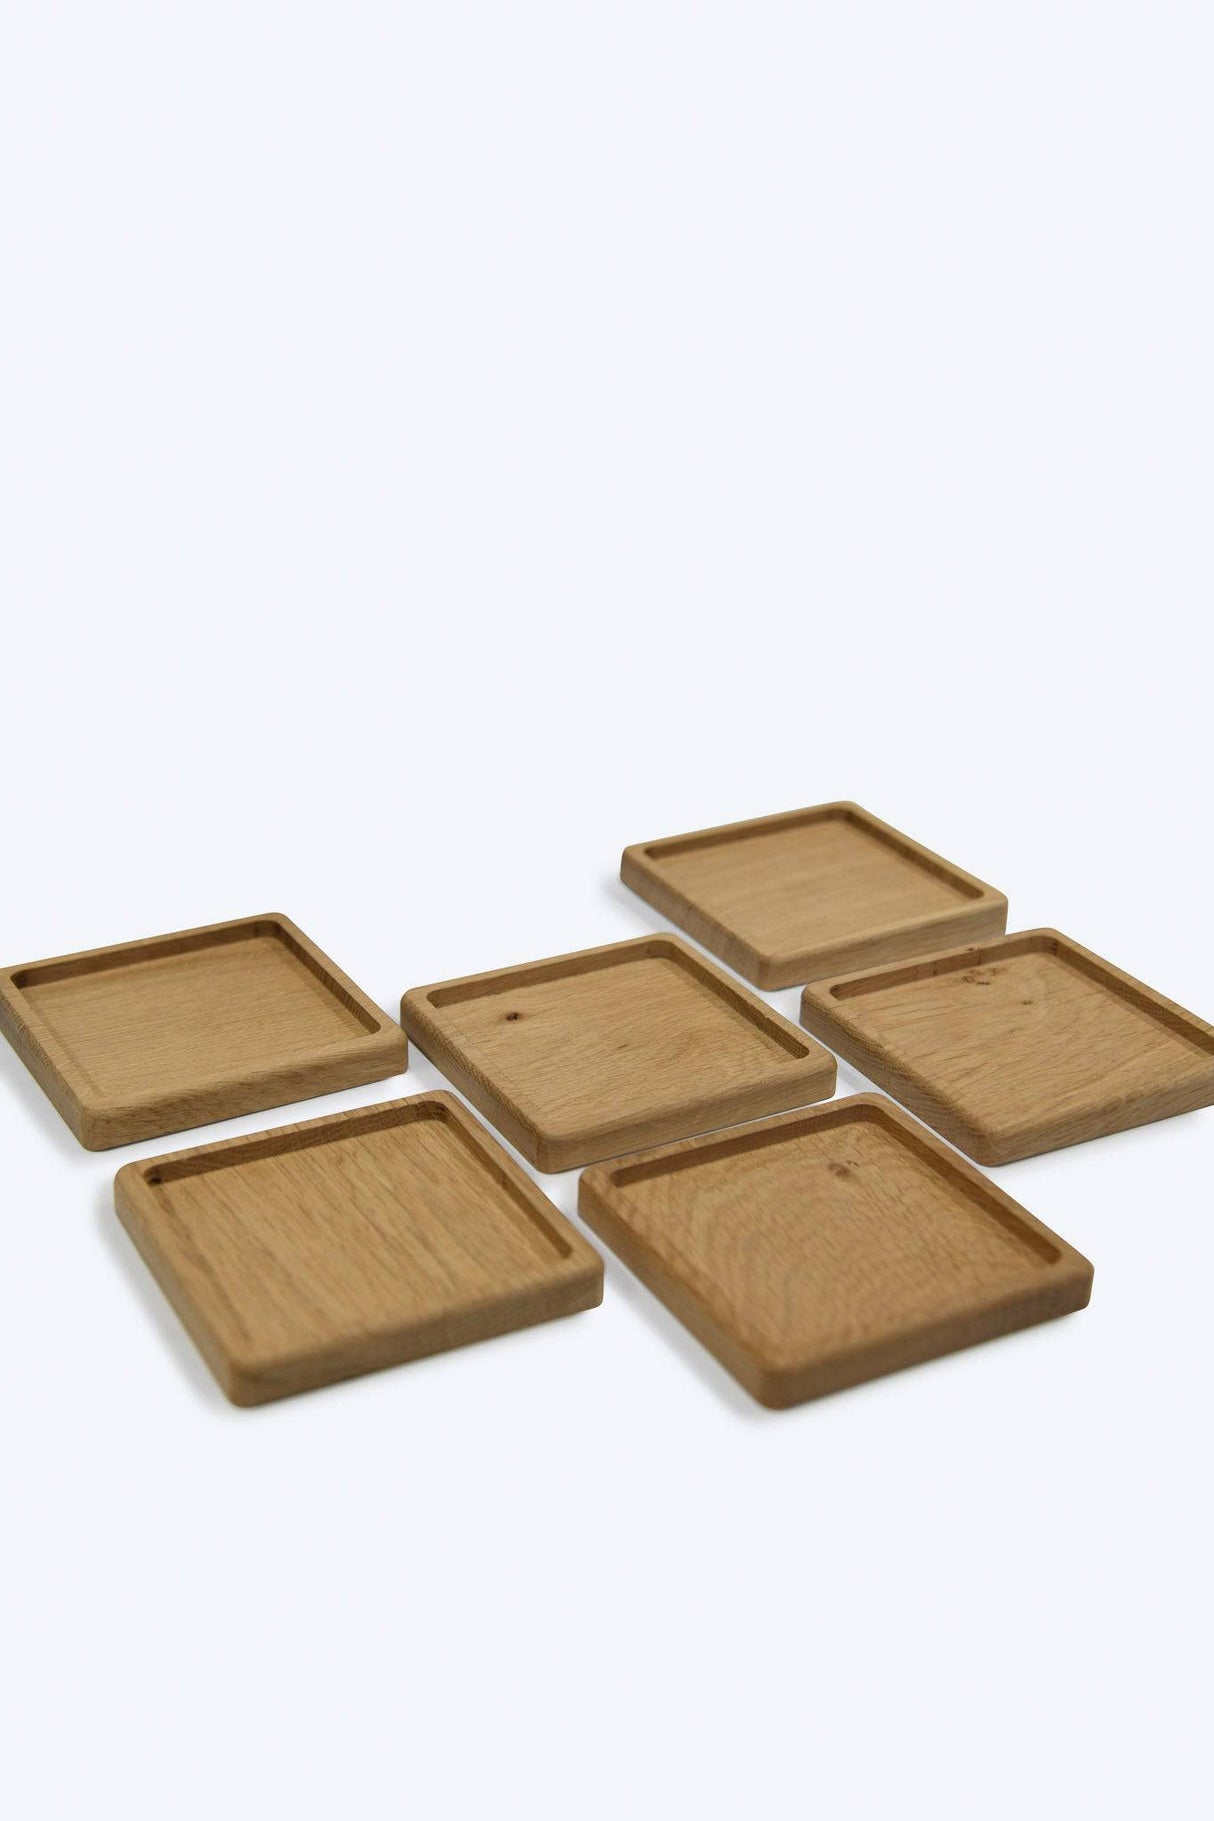 Coasters - Straight model - Oak wood - 6 pieces - Black or natural